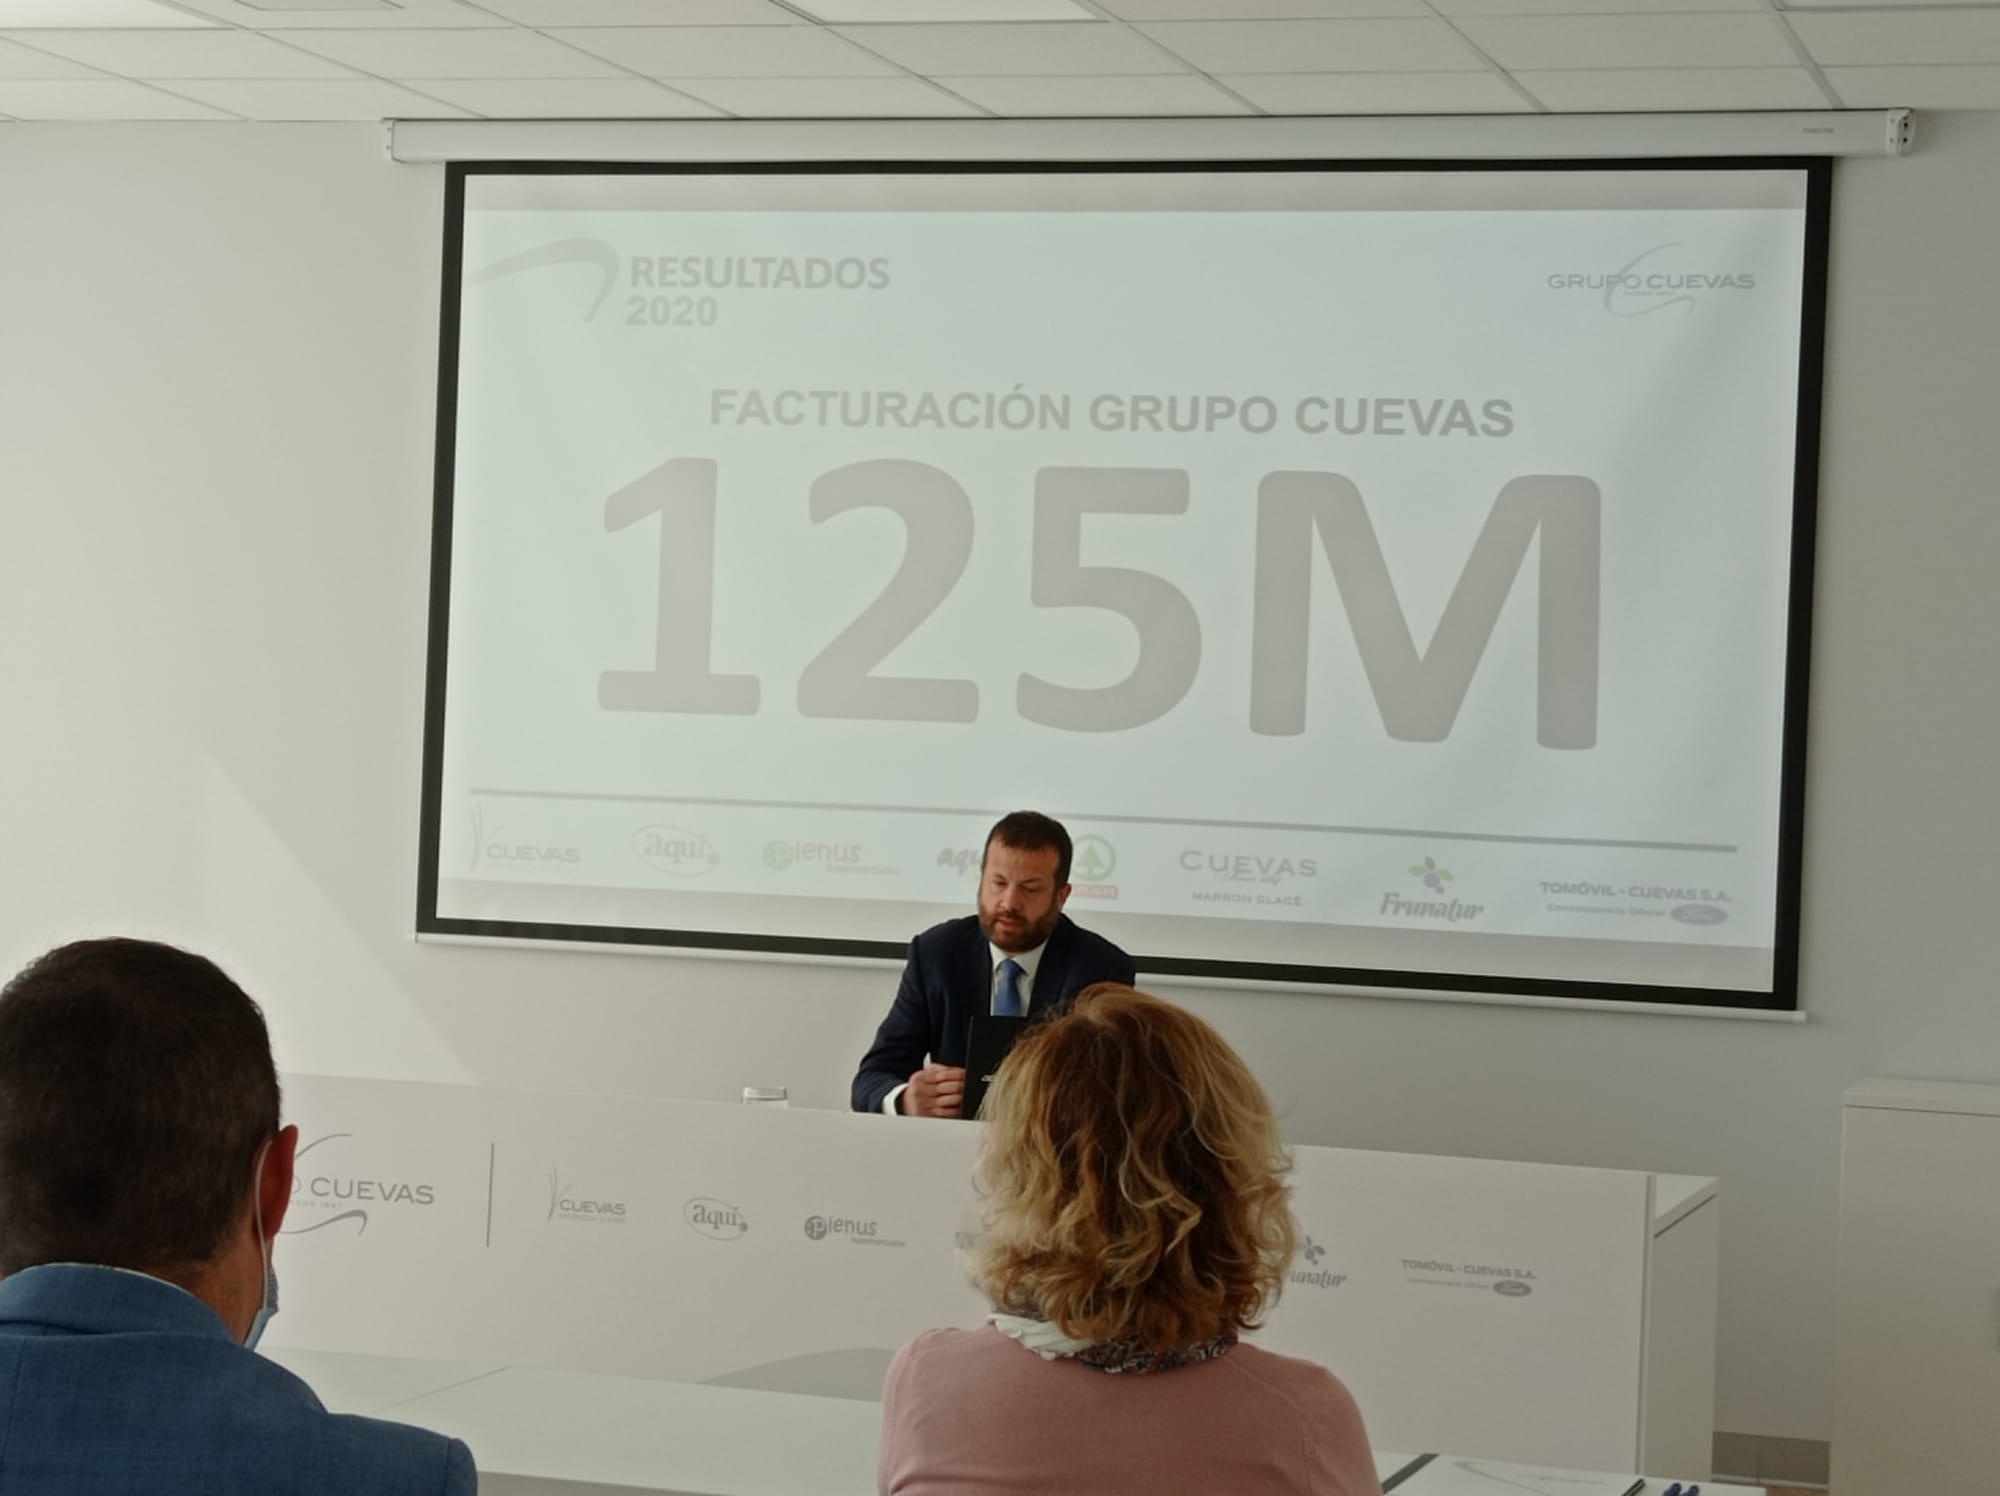 GRUPO CUEVAS GROWS BY 13.1% WITH A 125 MILLION TURNOVER IN THE MOST EXPANSIVE YEAR IN ITS HISTORY